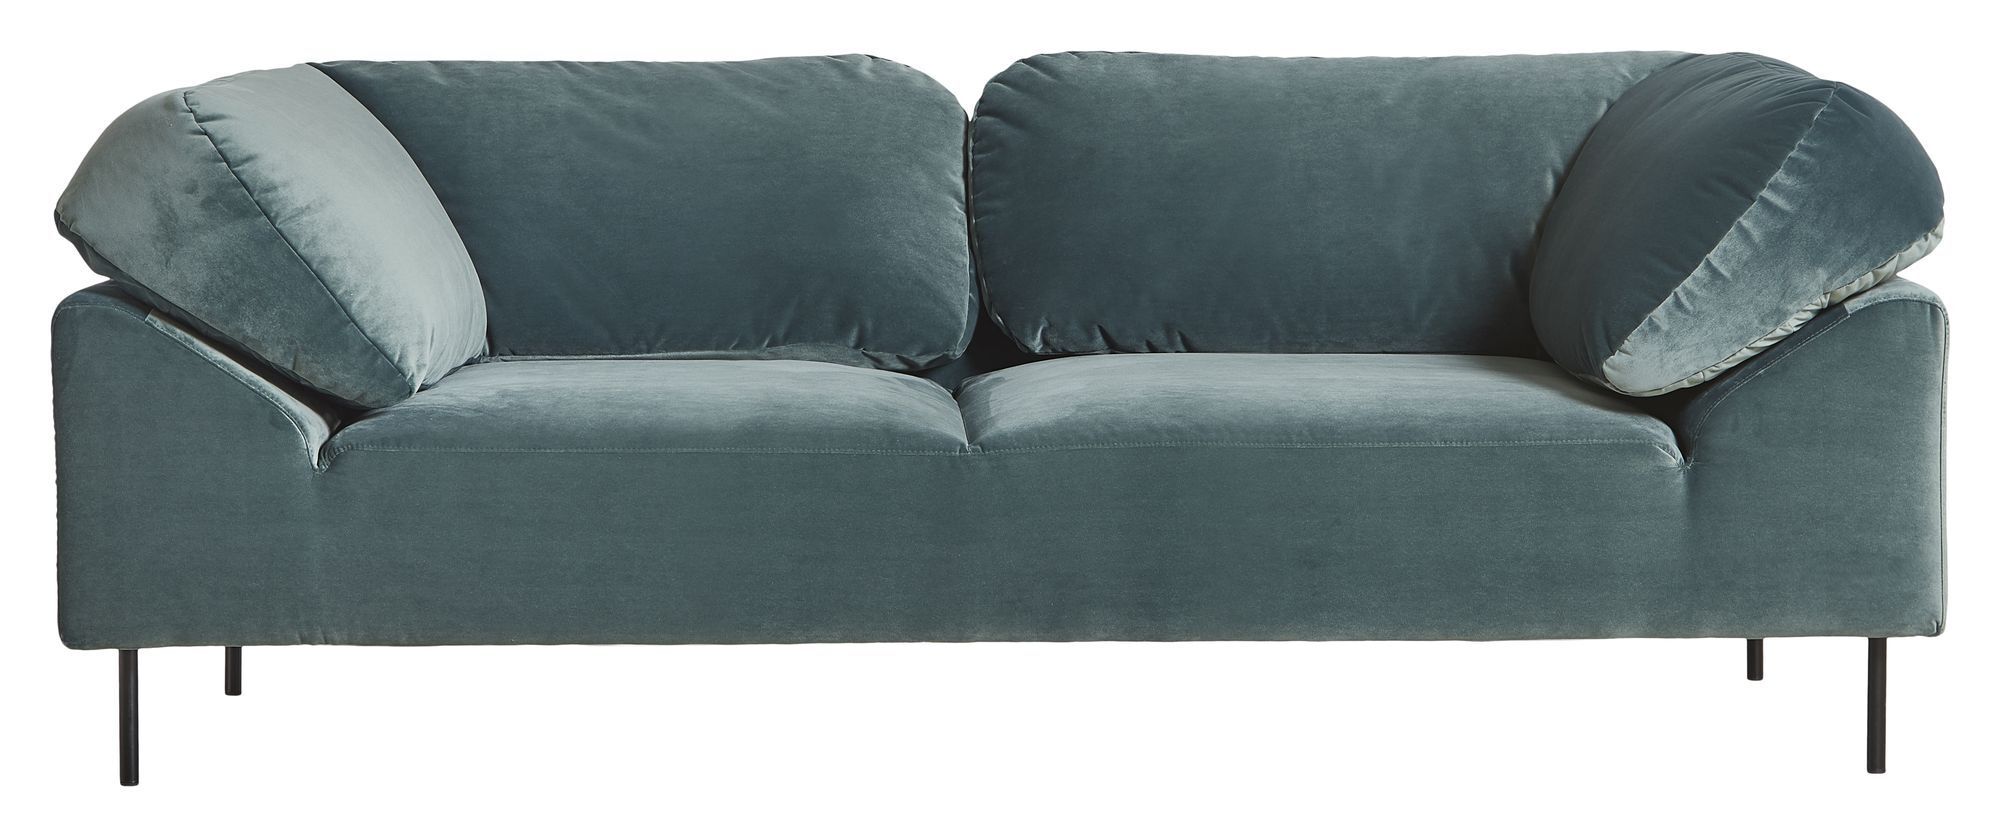 WOUD - Collar 2-seater Sofa   Unoliving